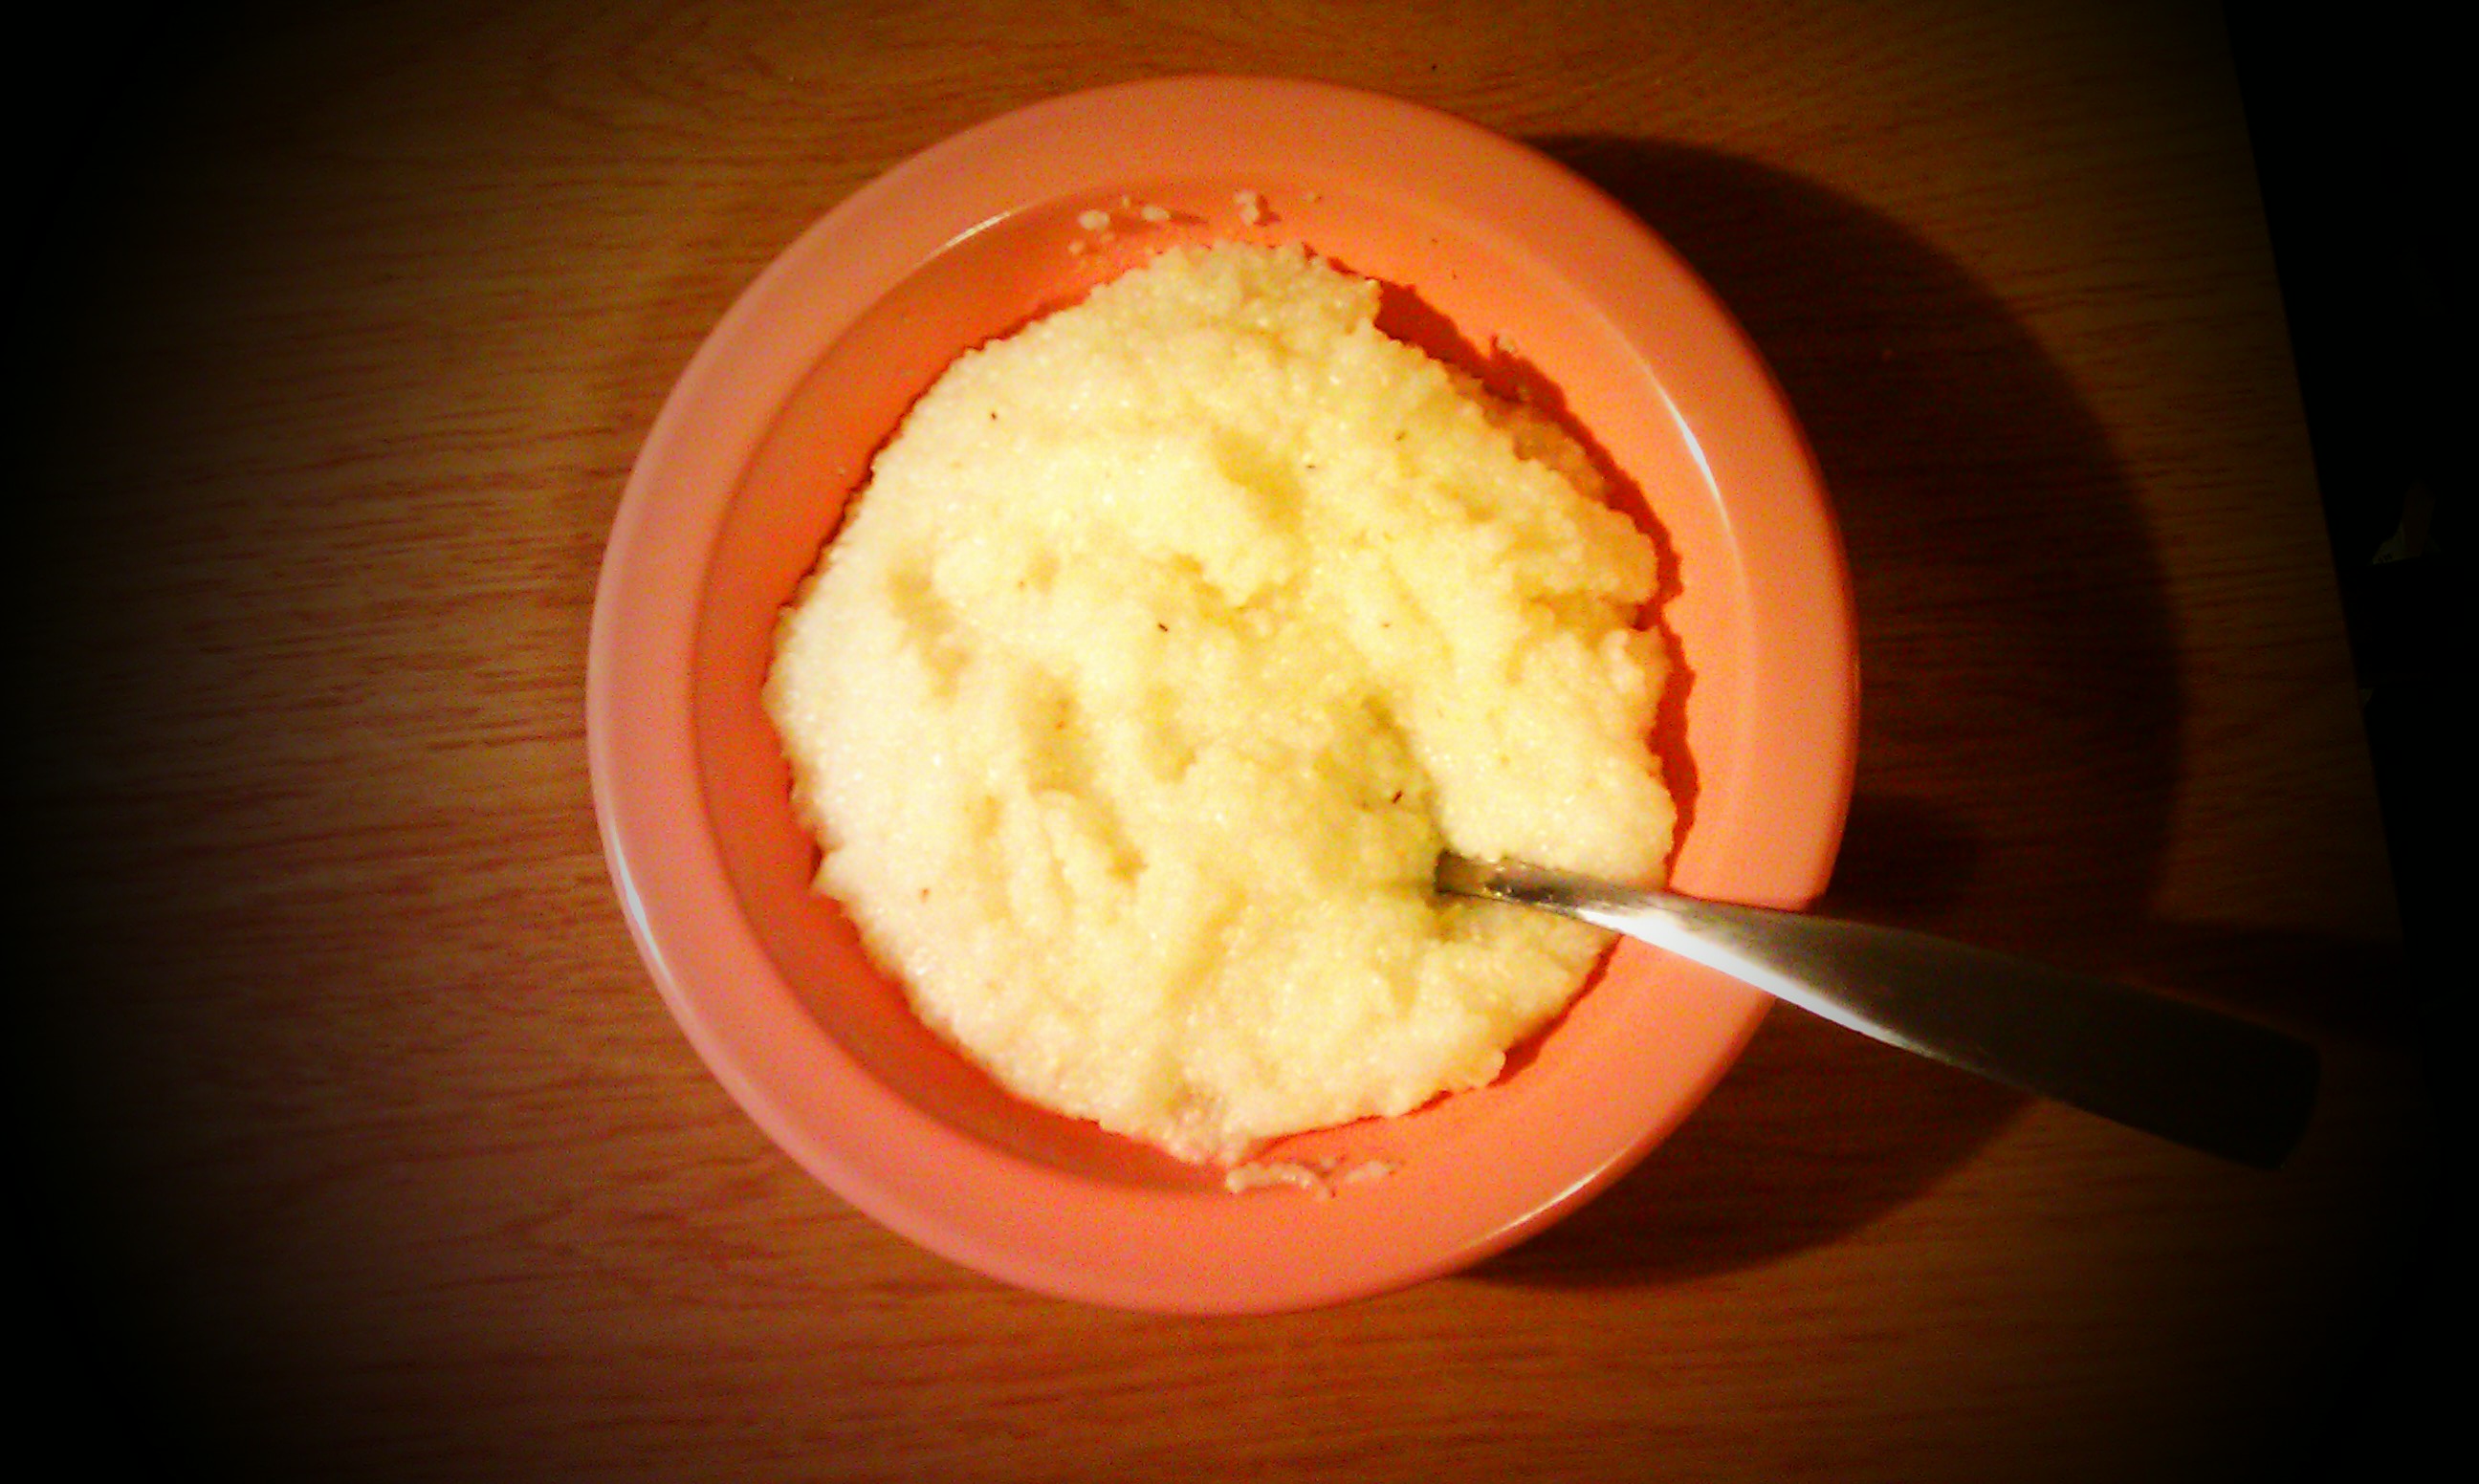 Bowl of grits